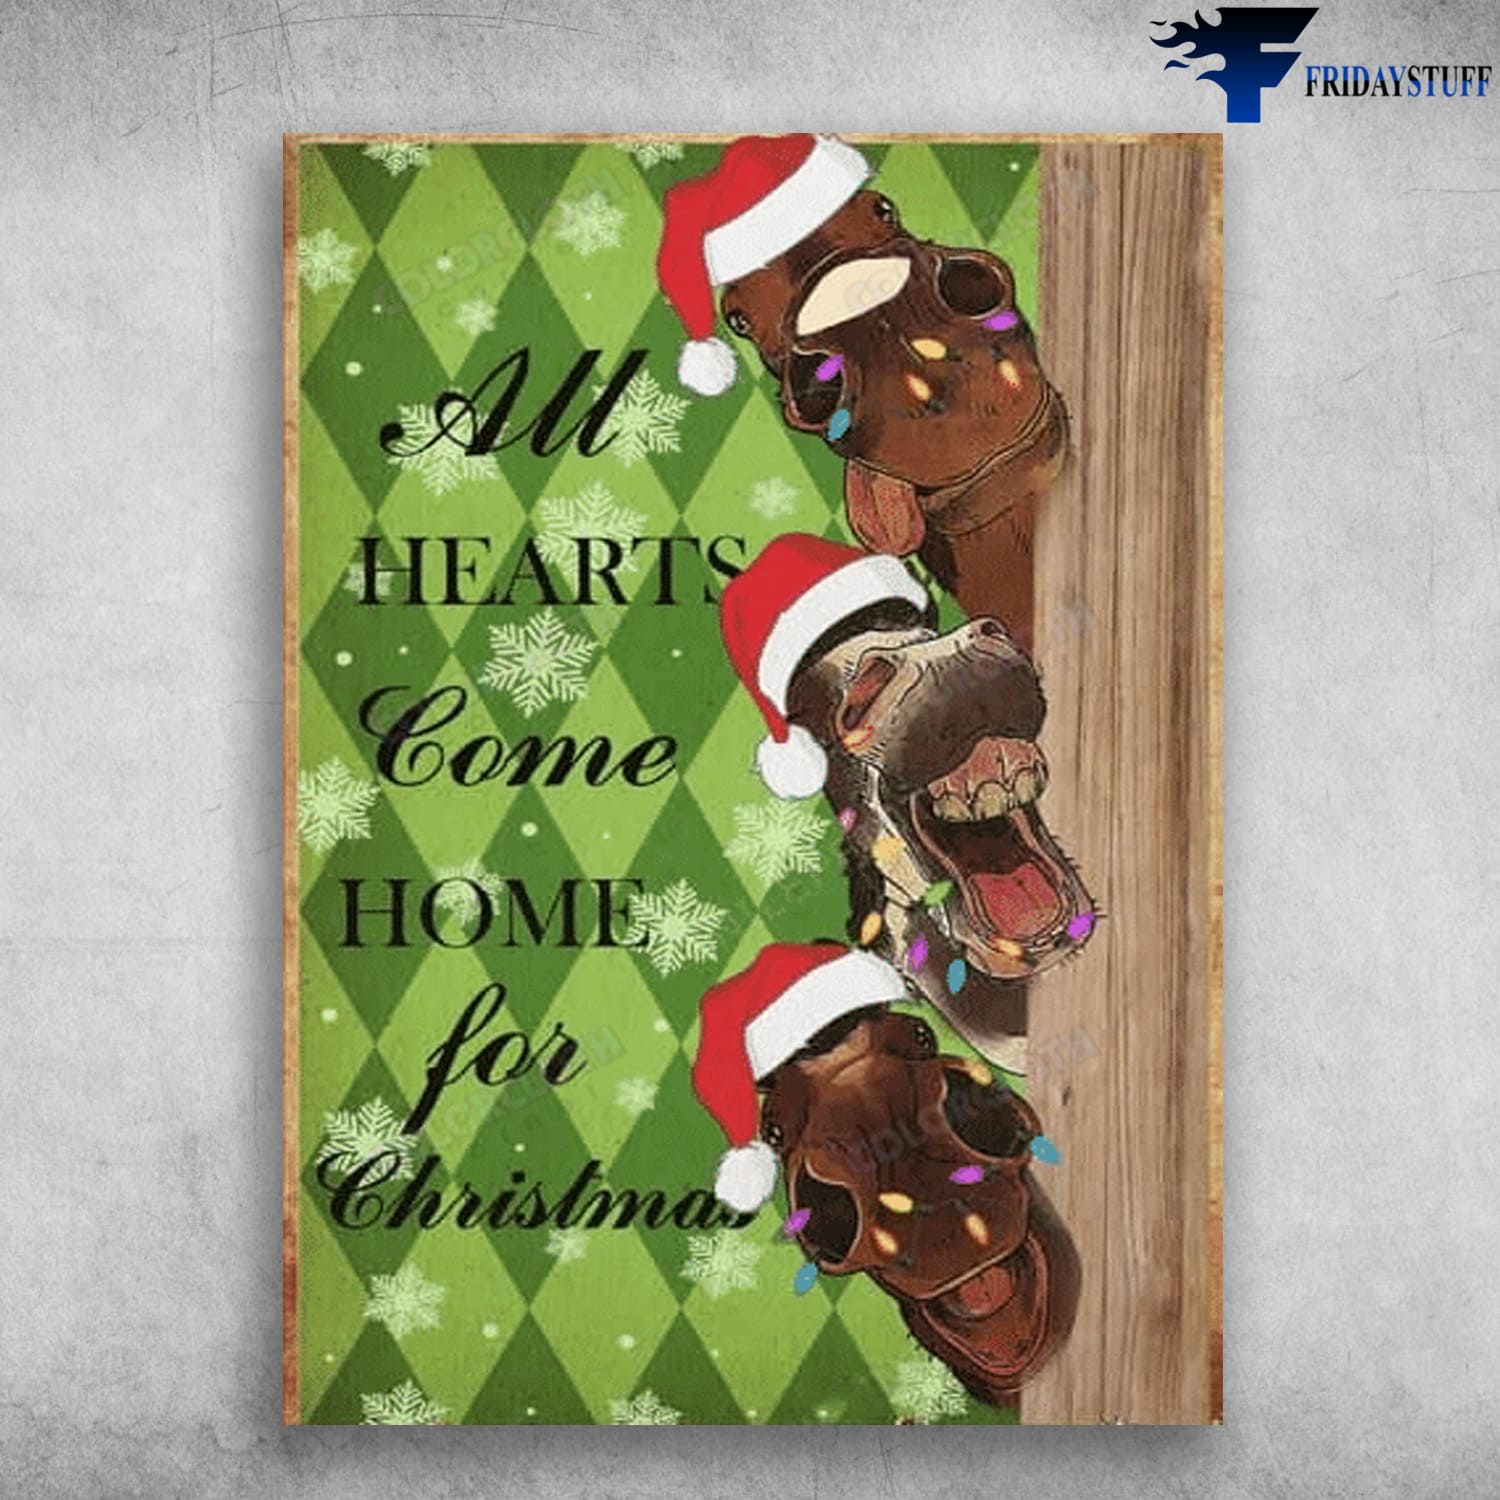 Funny Horse, Christmas Horse, All Hearts Come Home, For Christmas